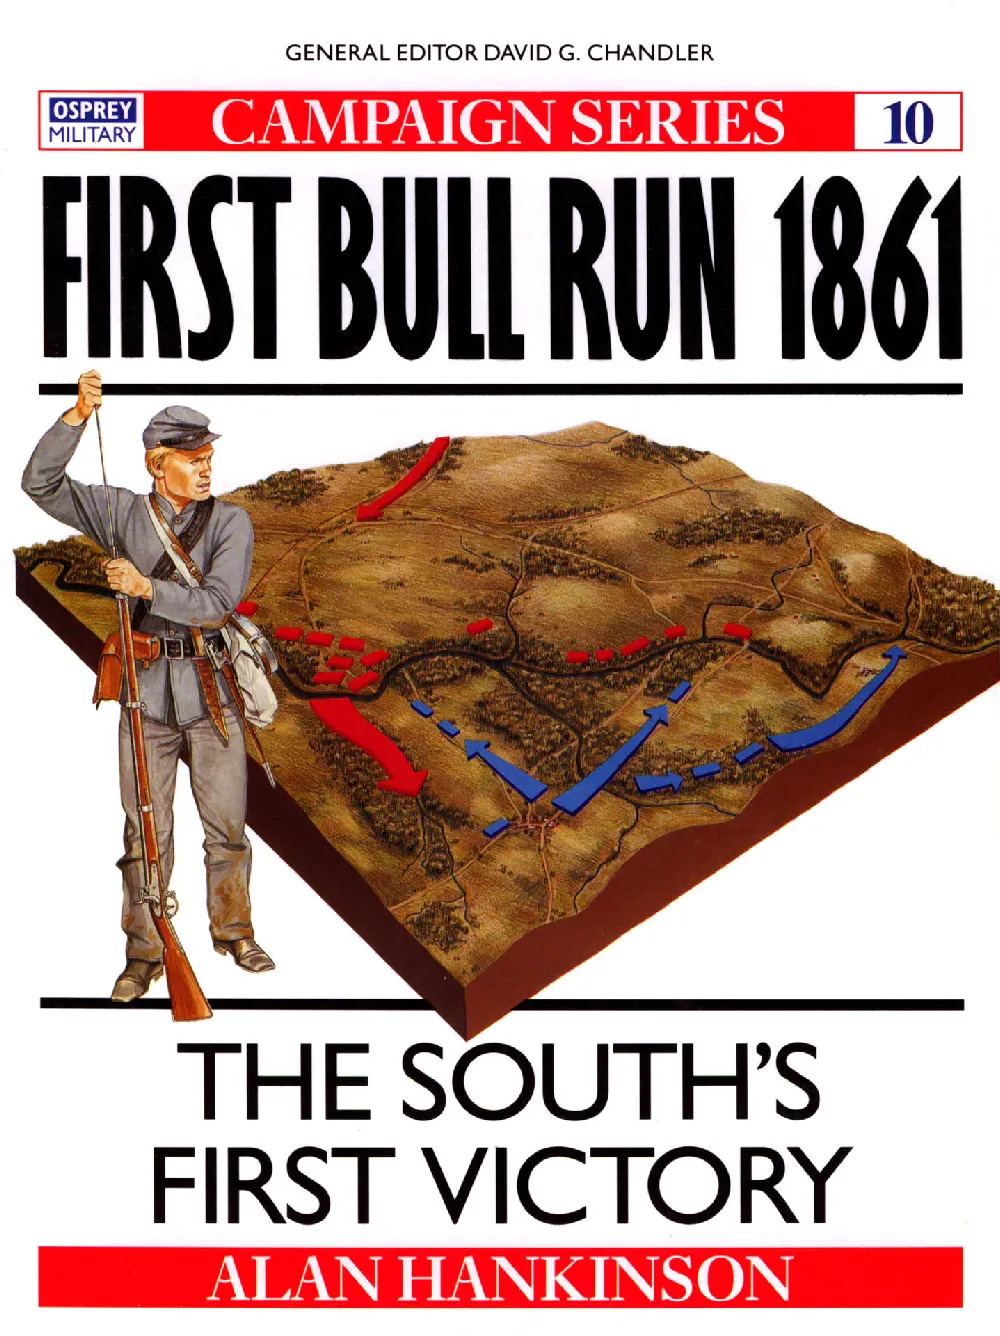 Osprey - Campaign 010 - First Bull Run 1861 - The South's First Victory